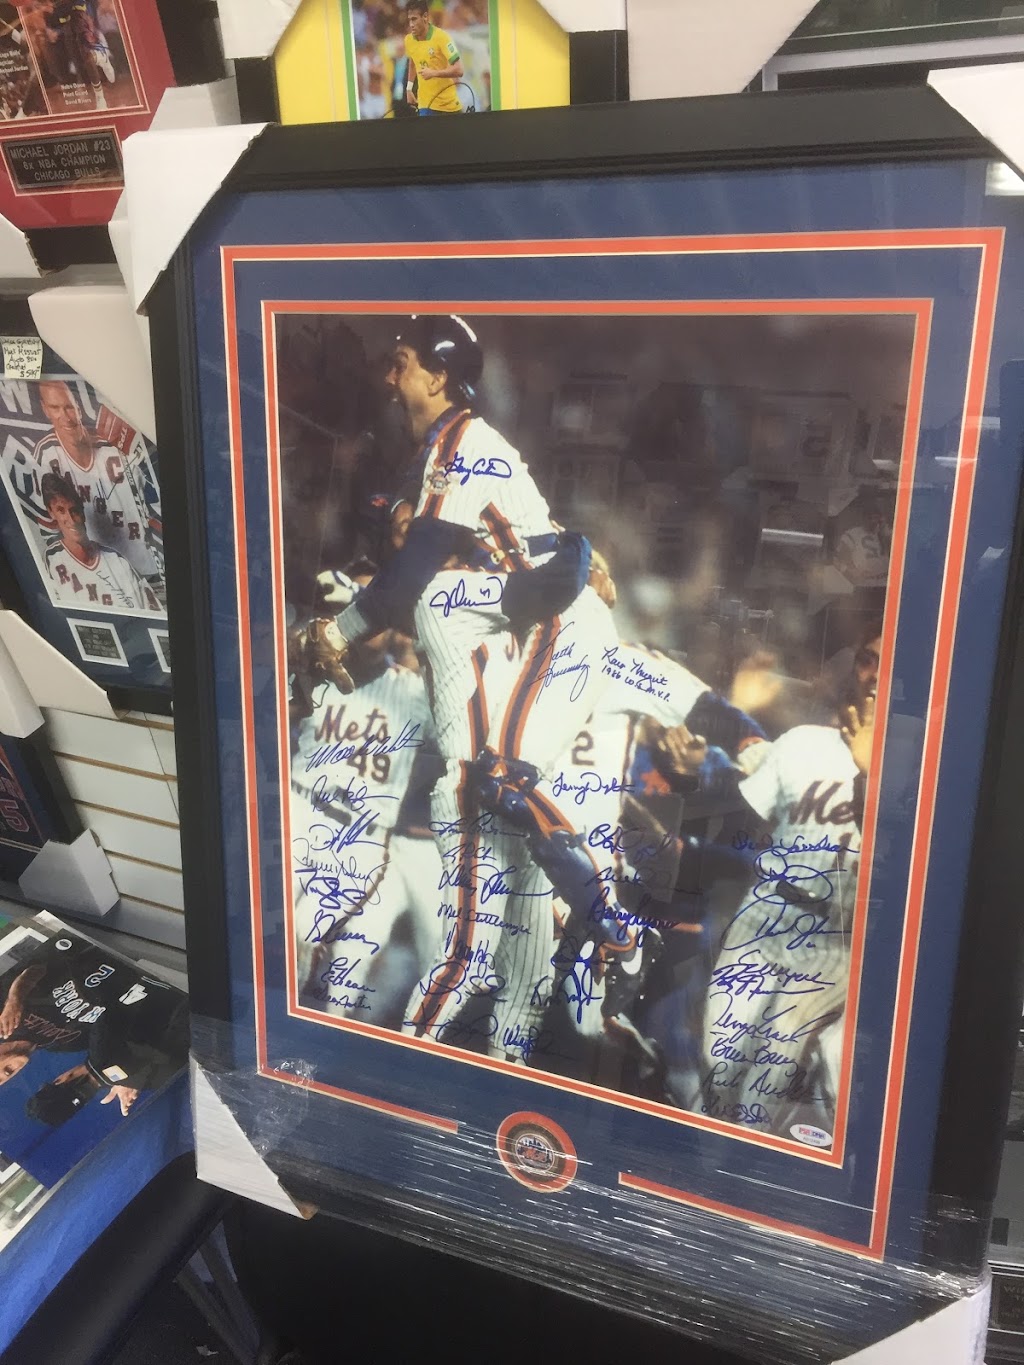 Living Legends Memorabilia and Collectibles, Inc. | 124 S Long Beach Rd, Rockville Centre, NY 11570 | Phone: (516) 826-4000